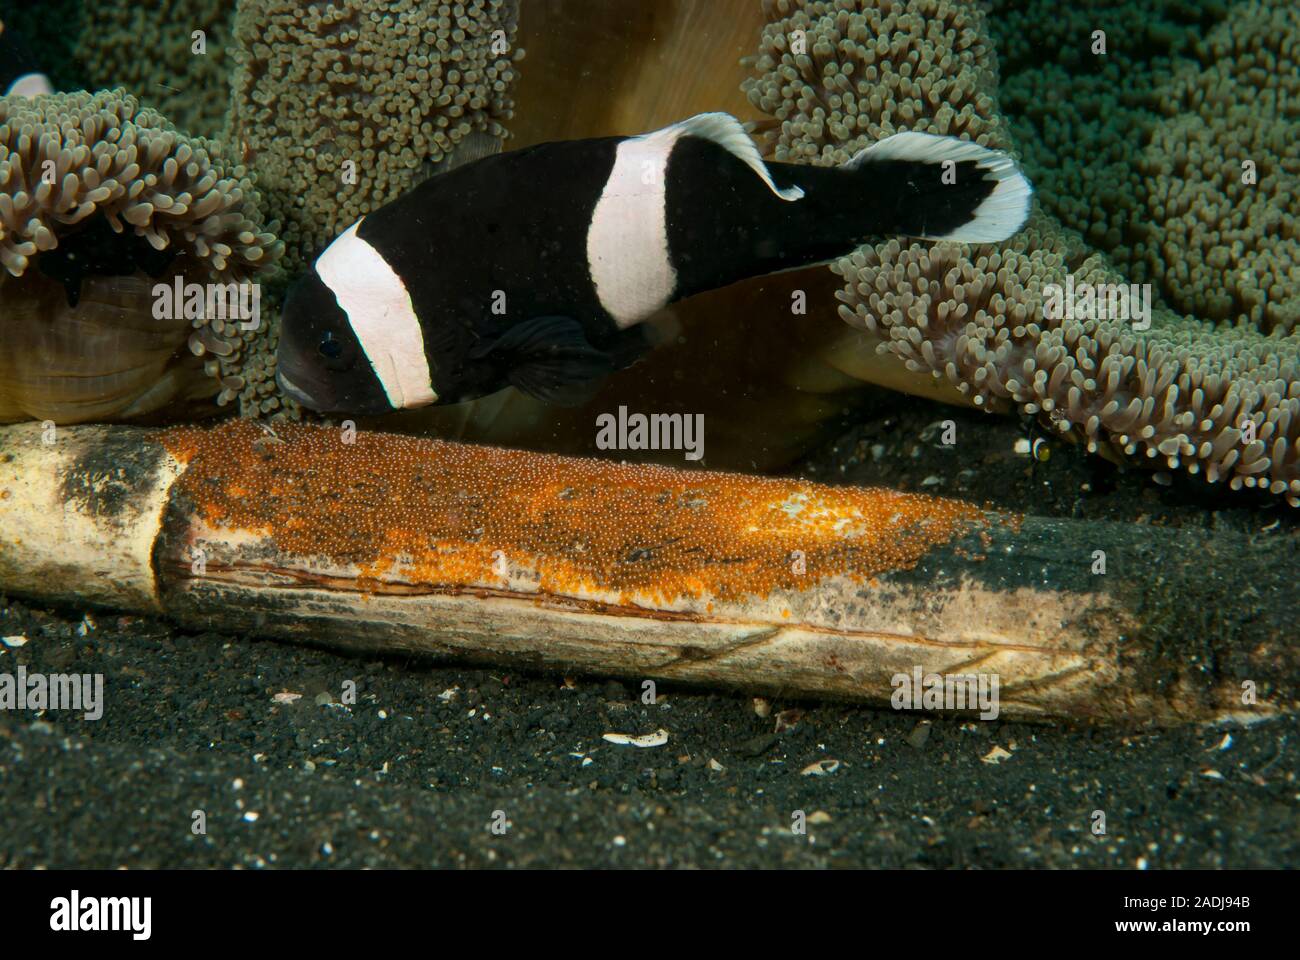 Anemonefish (or Clownfish) live in a symbiotic relationship with sea anemones. These little fish protect the anemone for predators like butteflyfish, Stock Photo